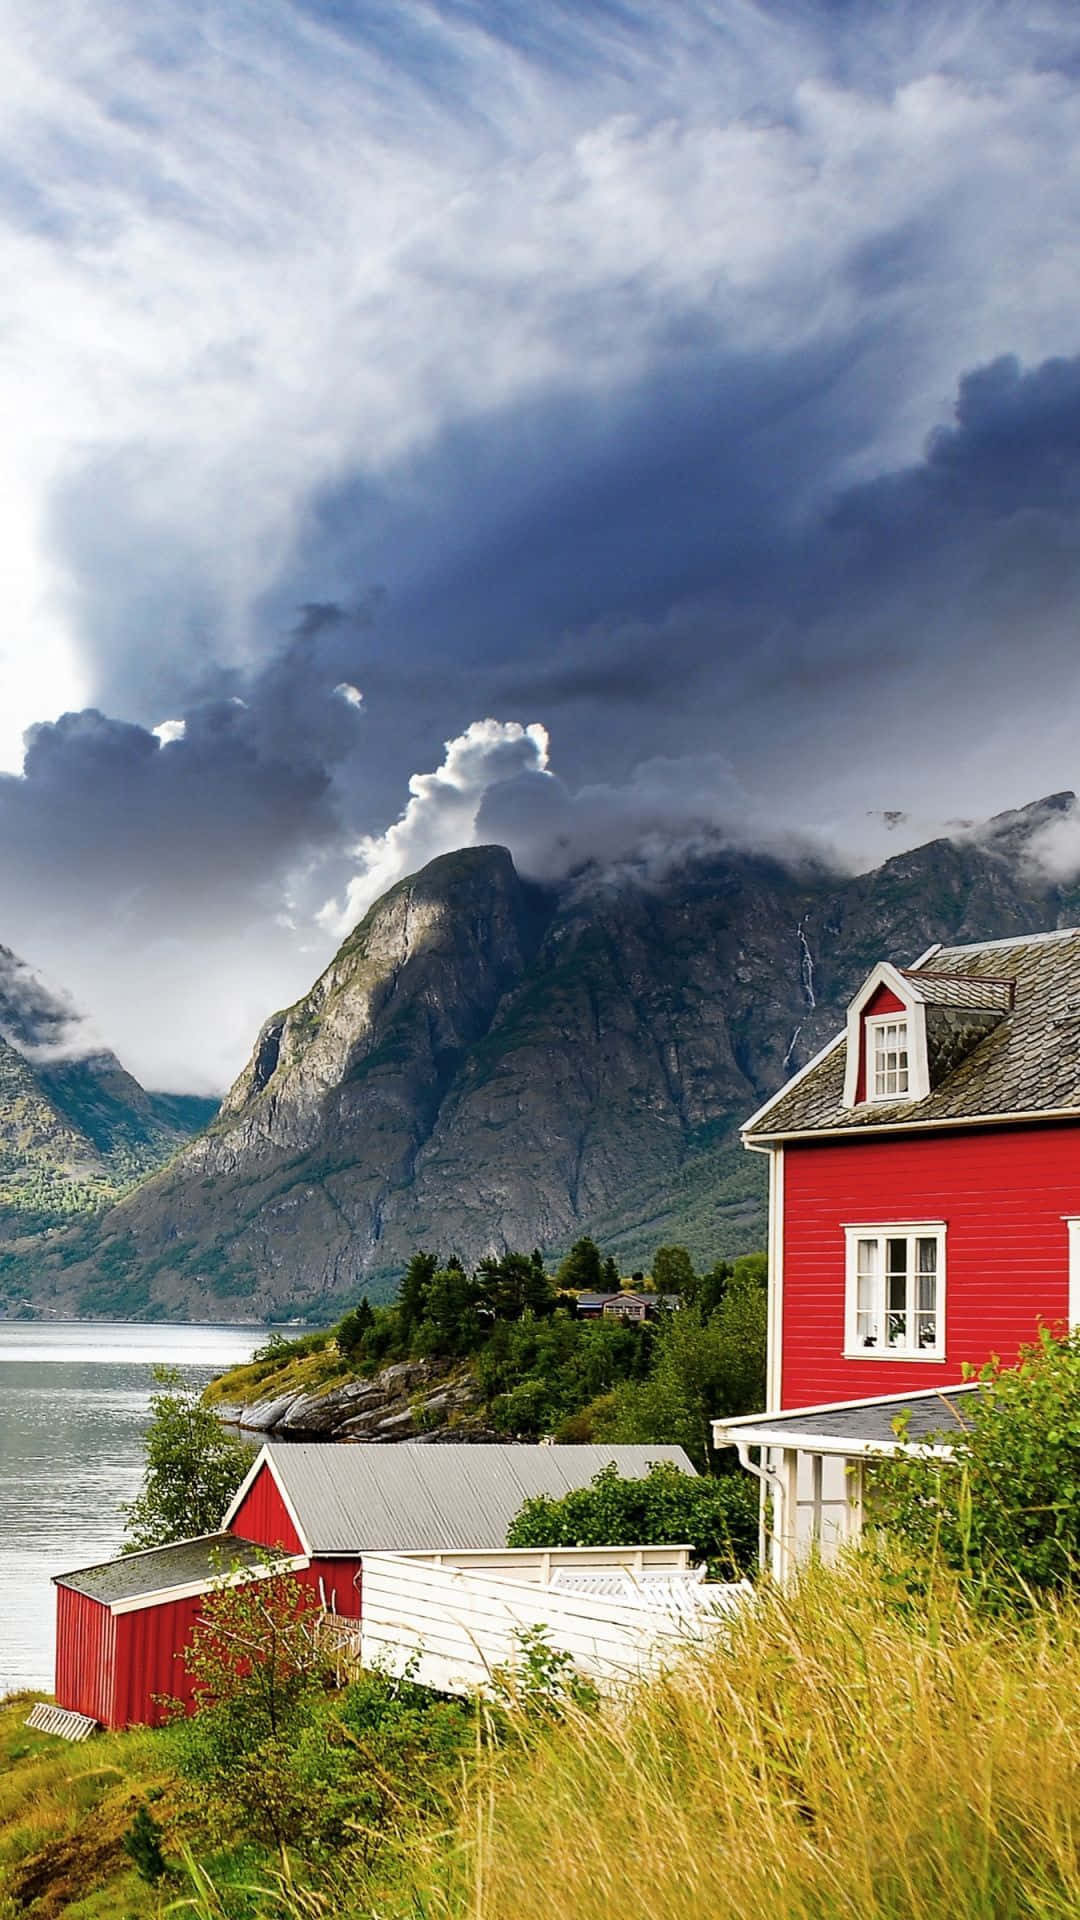 "The Majestic Fjords of Norway"